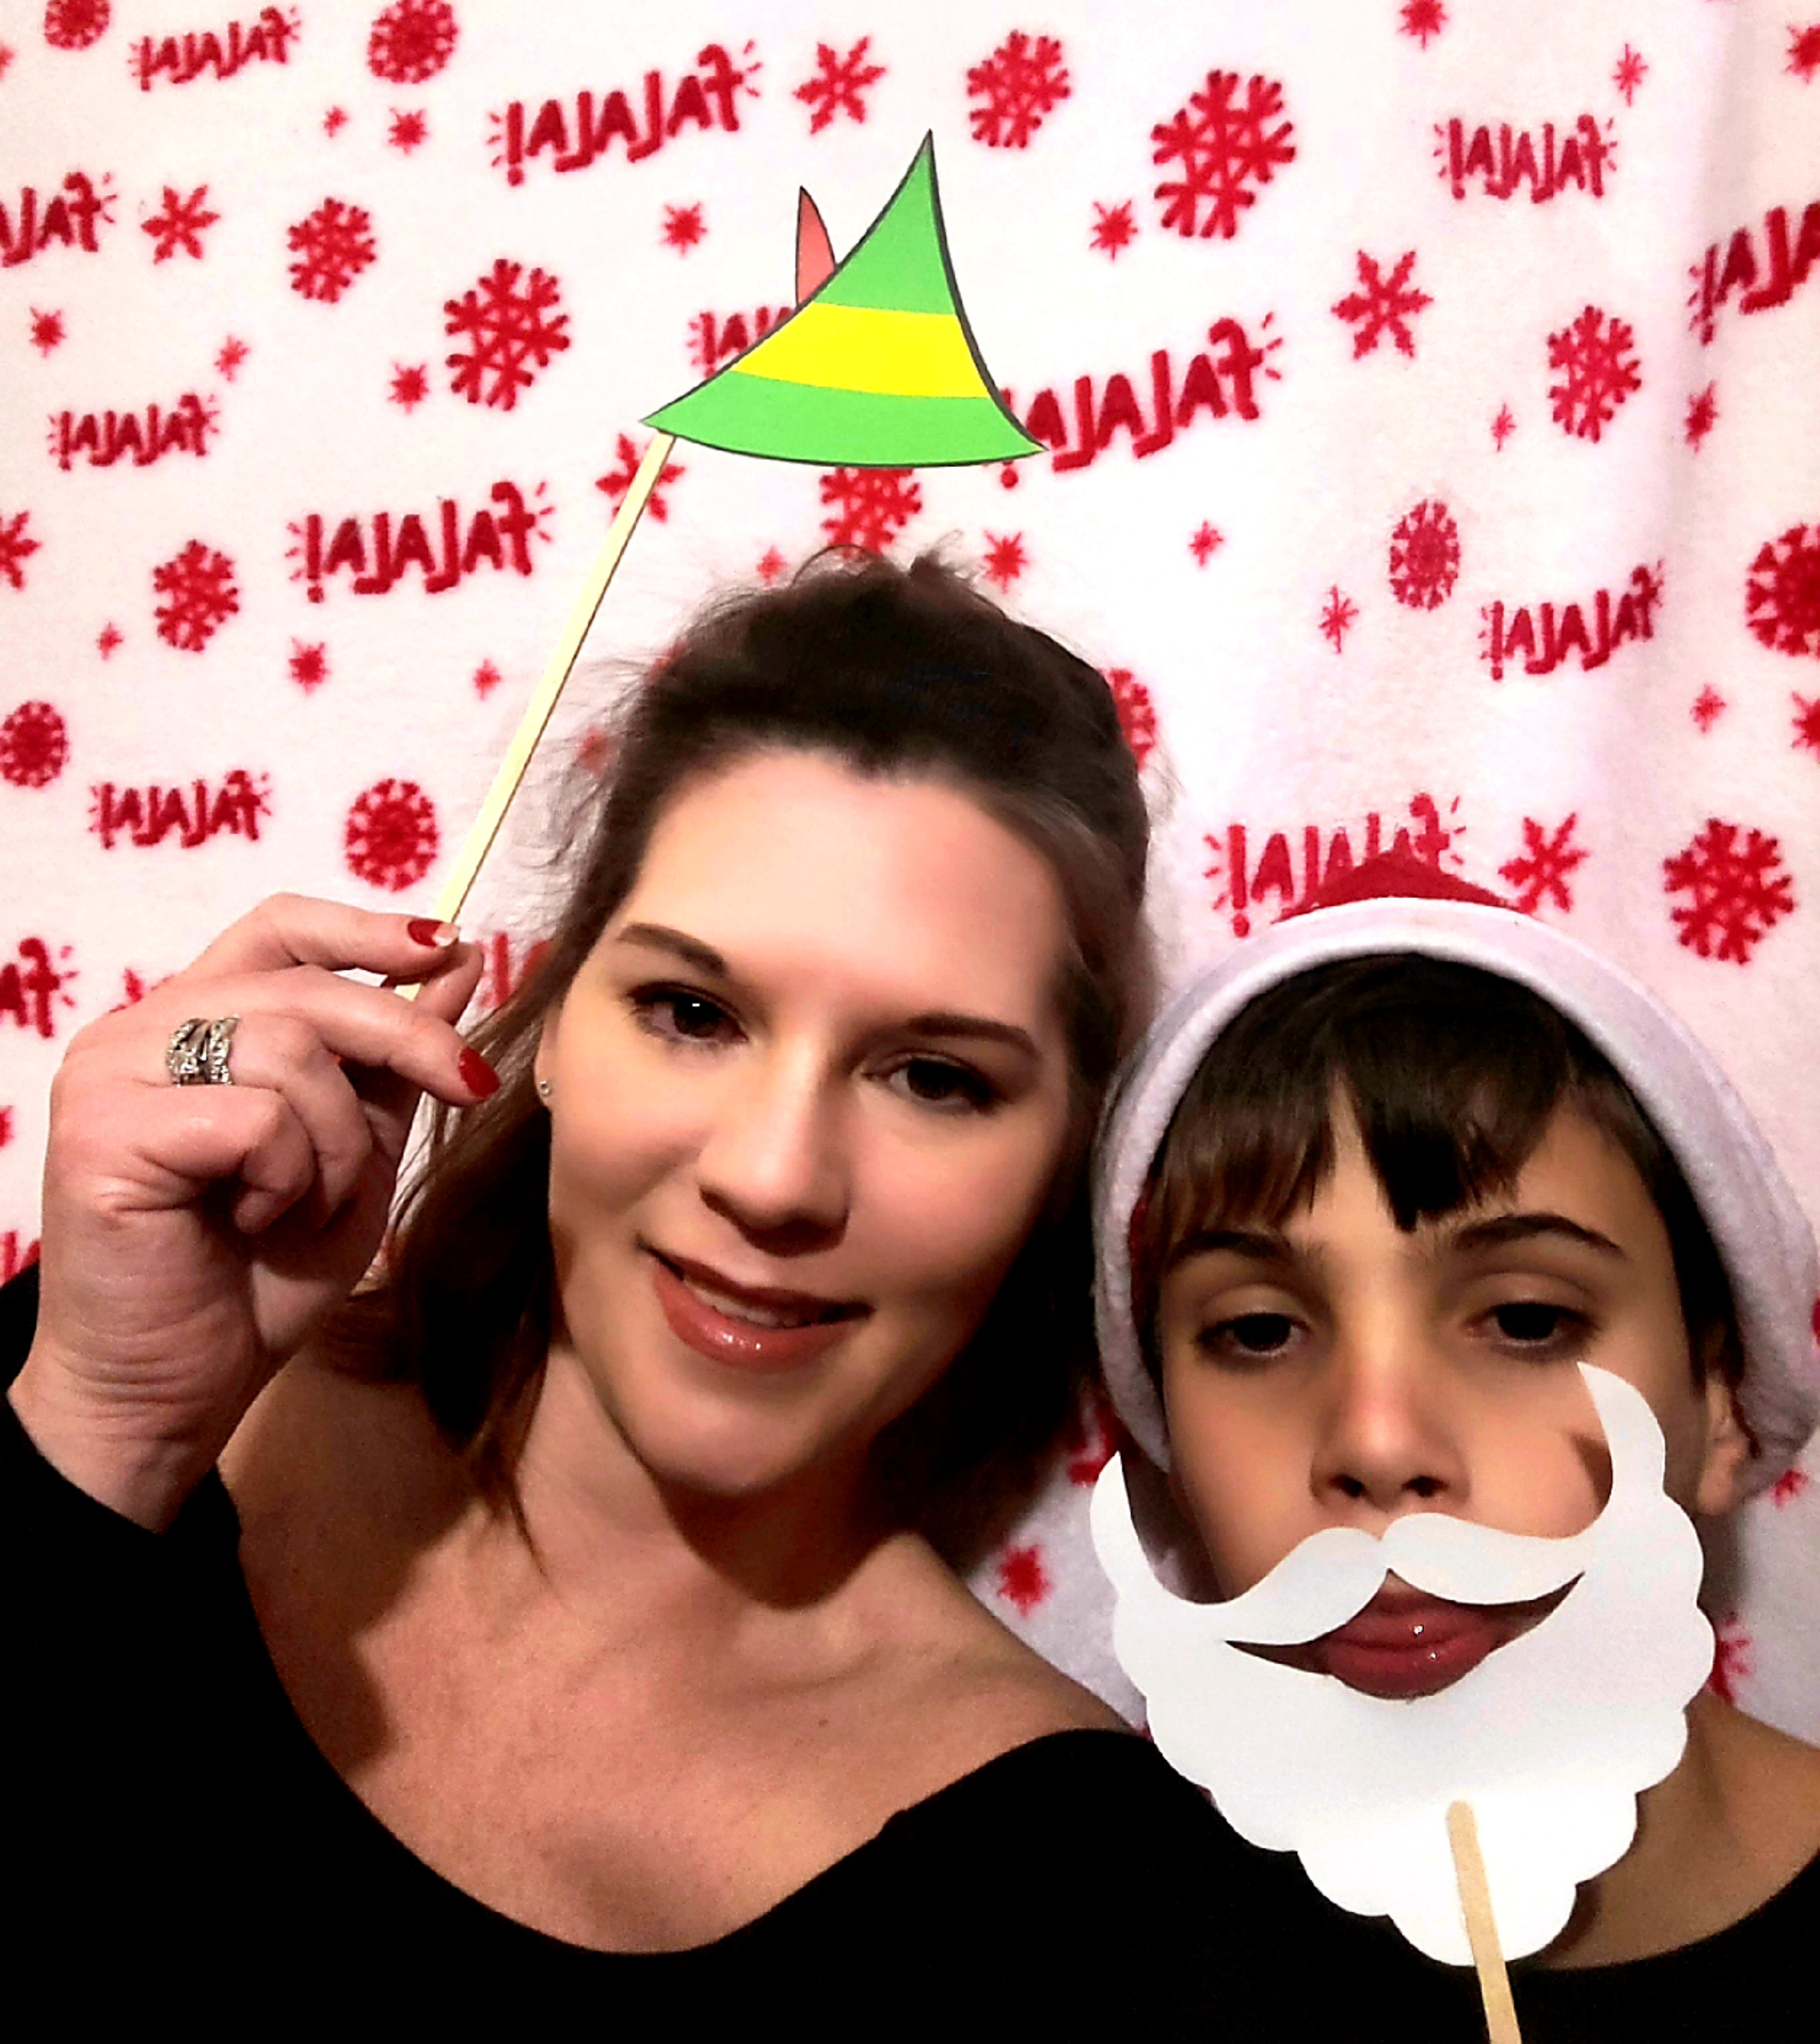 My son and I with a Buddy the Elf hat prop and a Santa beard and hat prop in the DIY Christmas photobooth set up with a Christmas blanket backdrop on Elf family movie night.